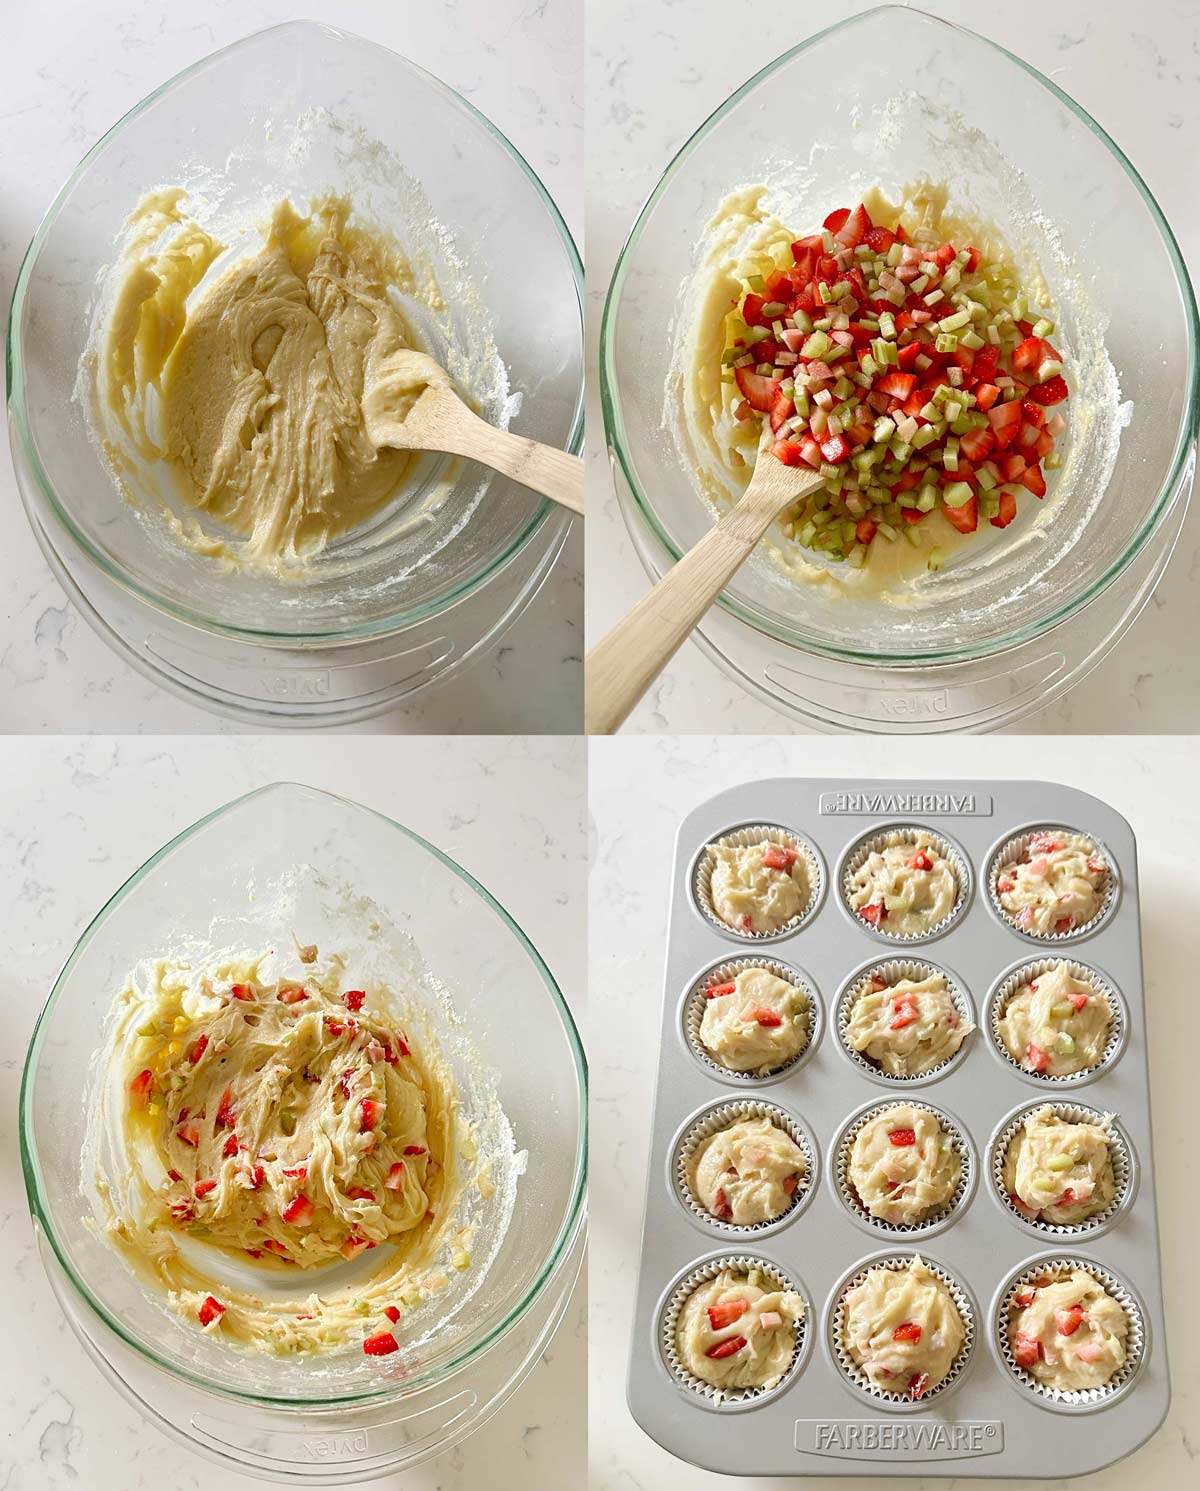 Collage of process photos making a muffin batter glass bowl filled with batter and mixed with strawberries and rhubarb and a muffin tin filled with muffin liners and batter.